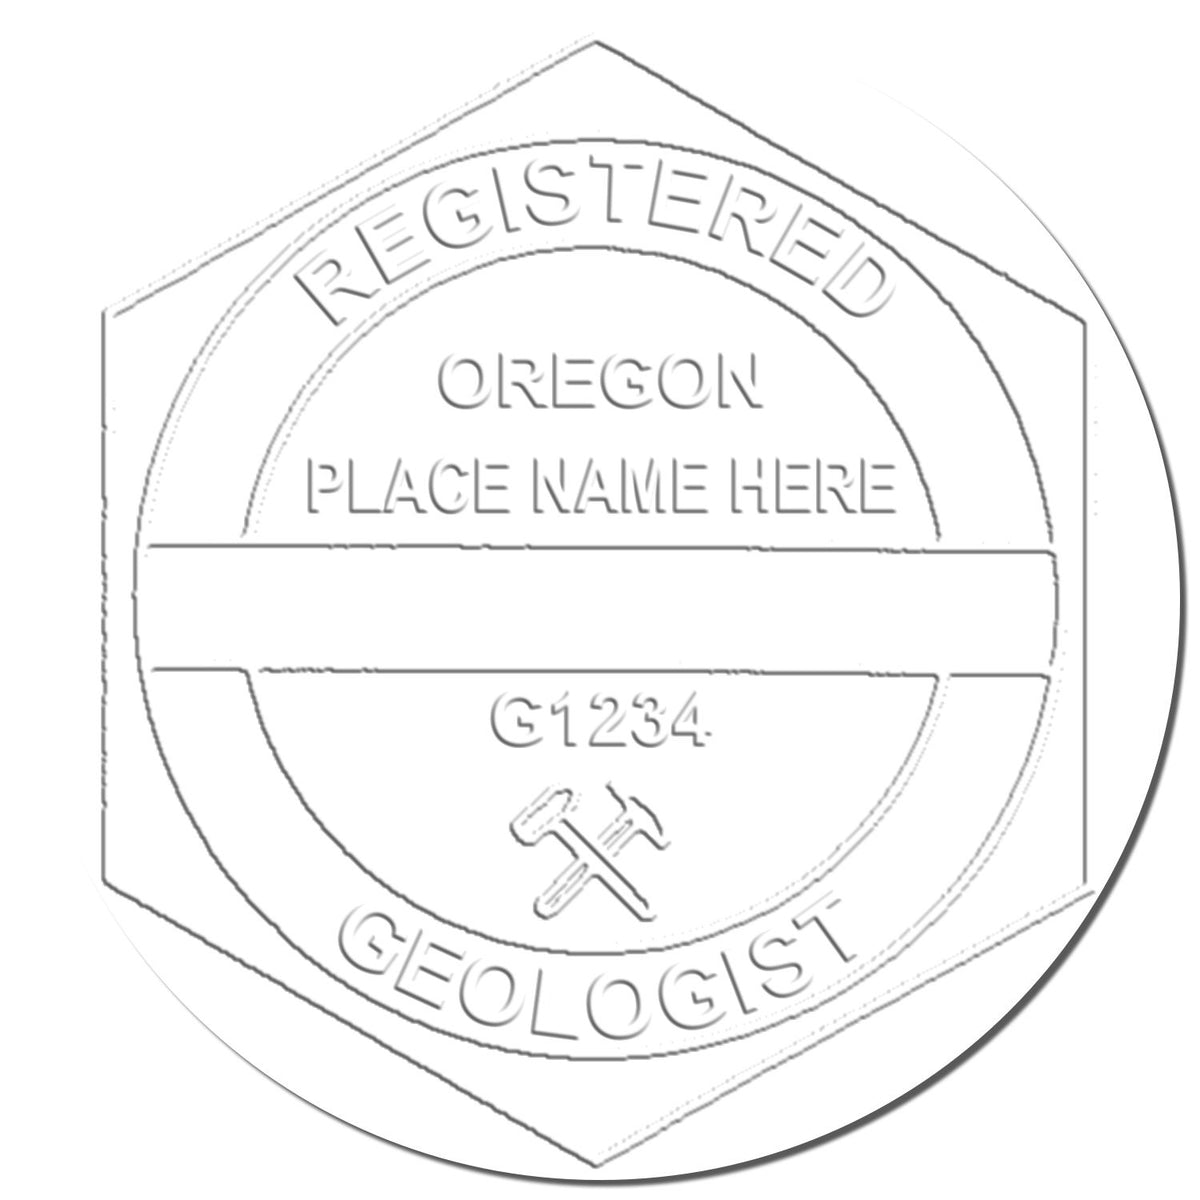 The Oregon Geologist Desk Seal stamp impression comes to life with a crisp, detailed image stamped on paper - showcasing true professional quality.